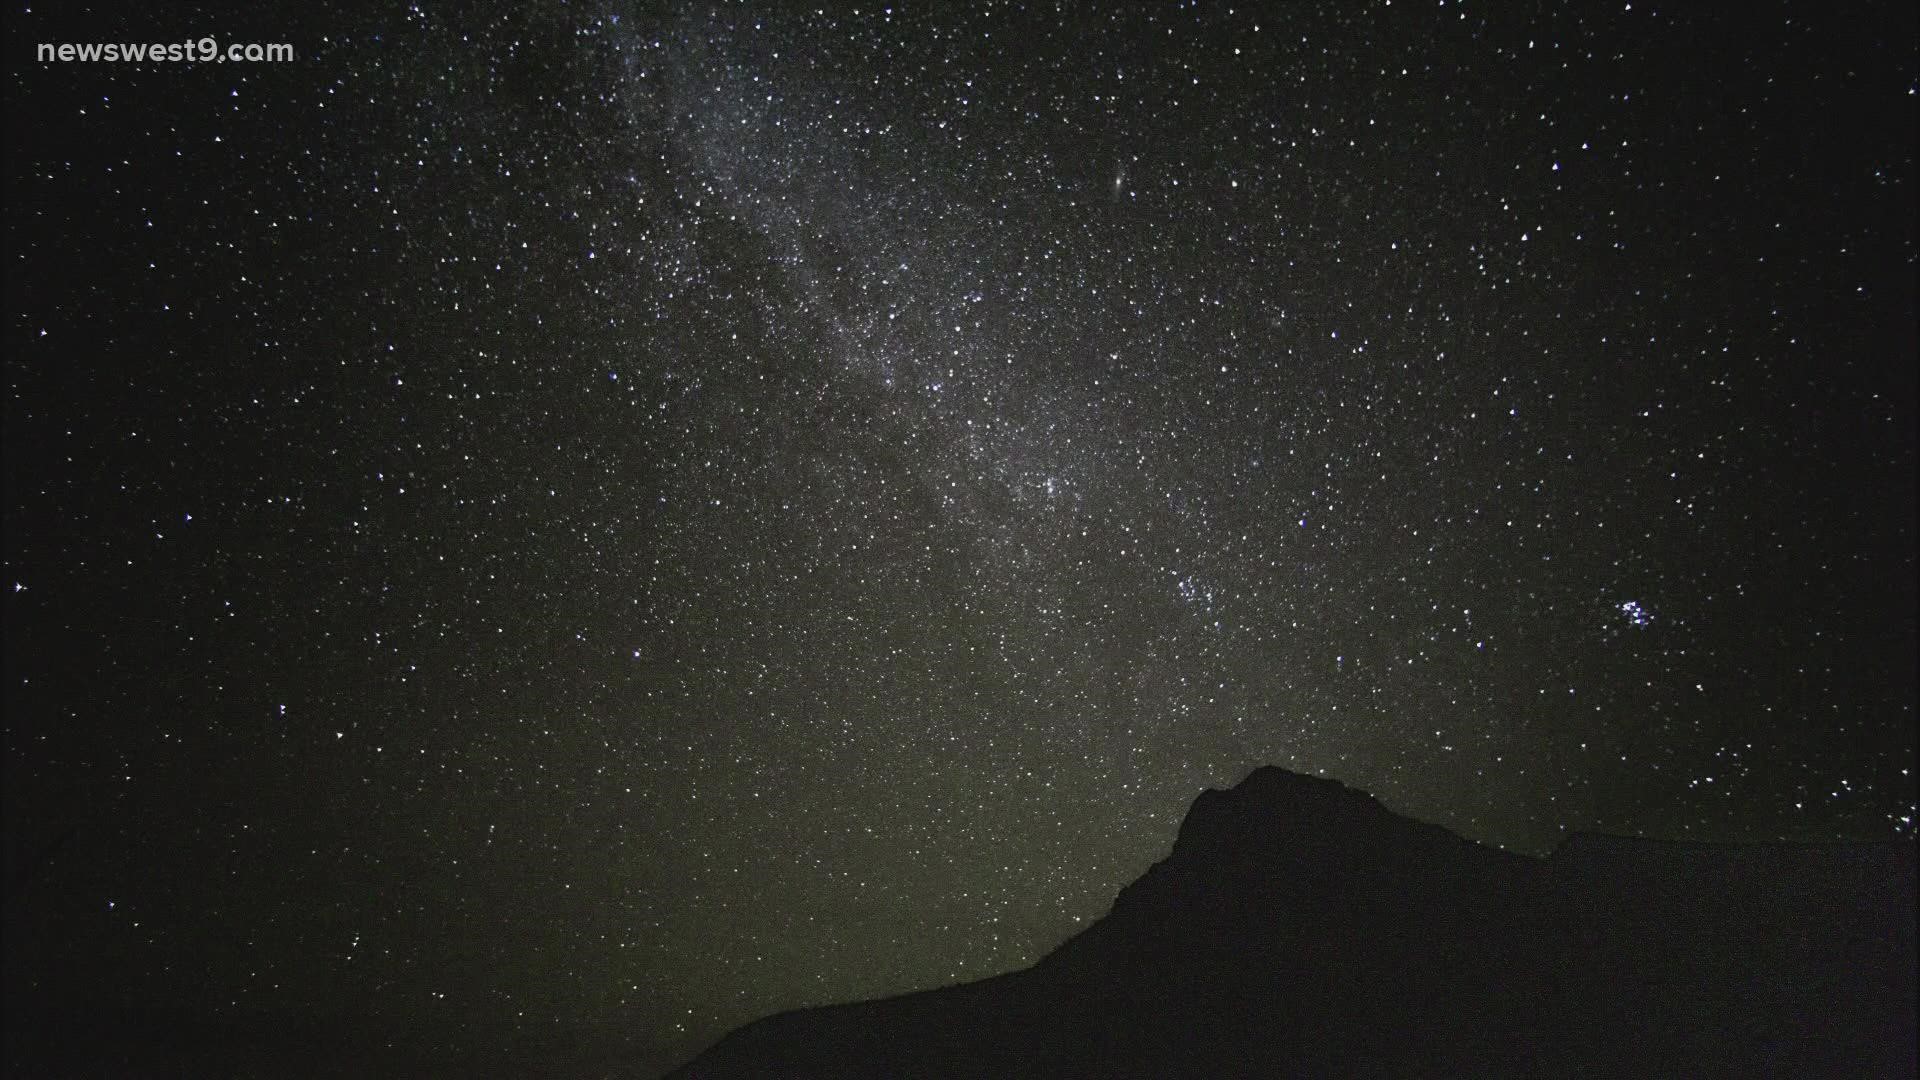 This vote comes after the application to designate Big Bend International a Dark Sky Reserve.